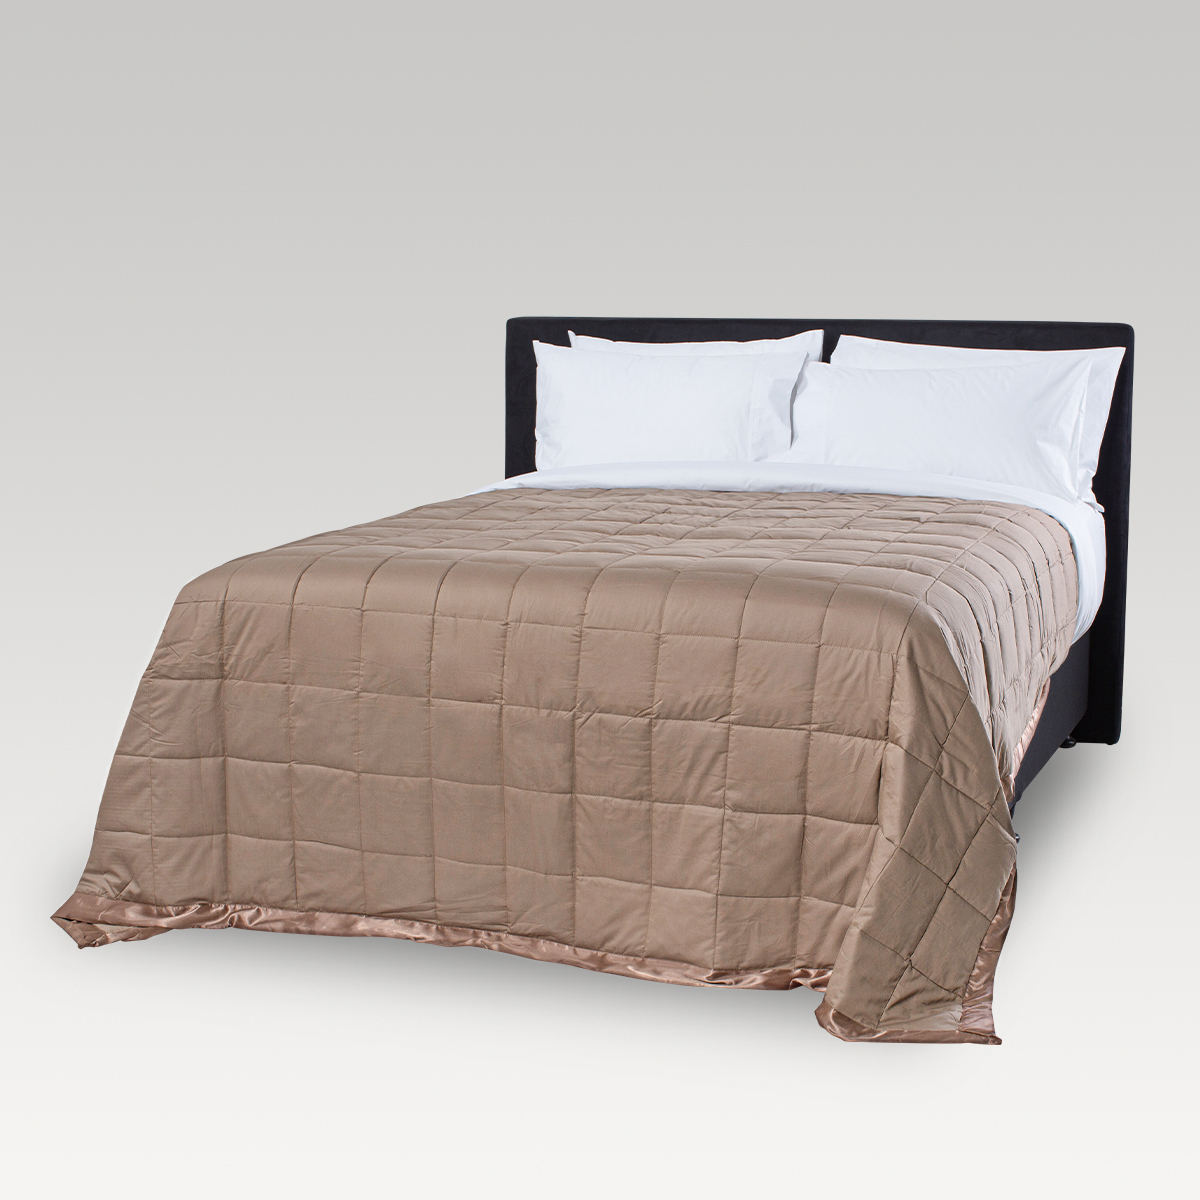 Image of Dreamticket Oasis Deluxe Blanket Taupe